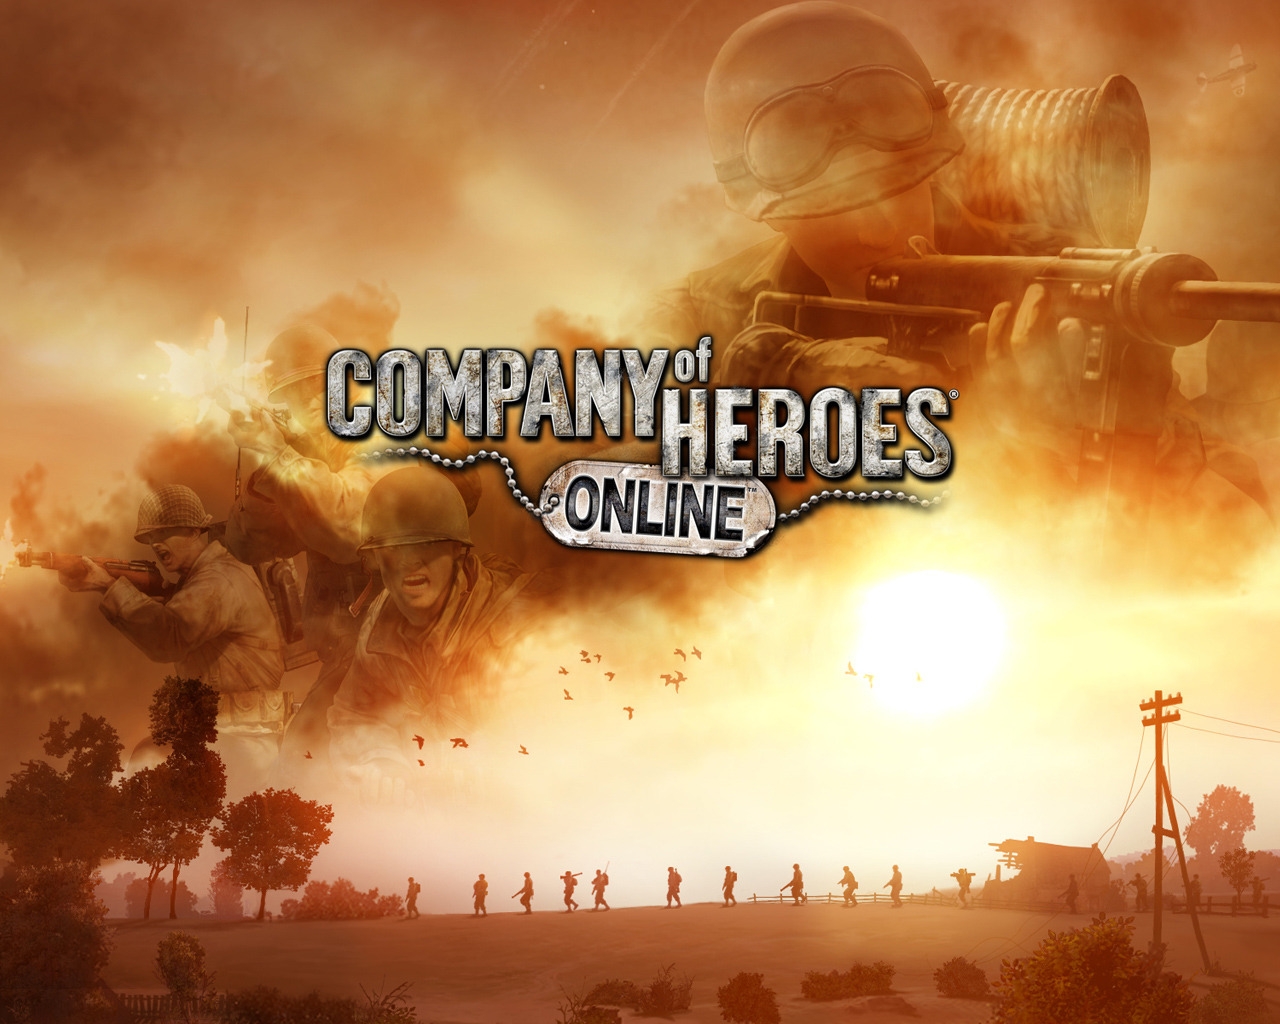 Company of Heroes Online for 1280 x 1024 resolution